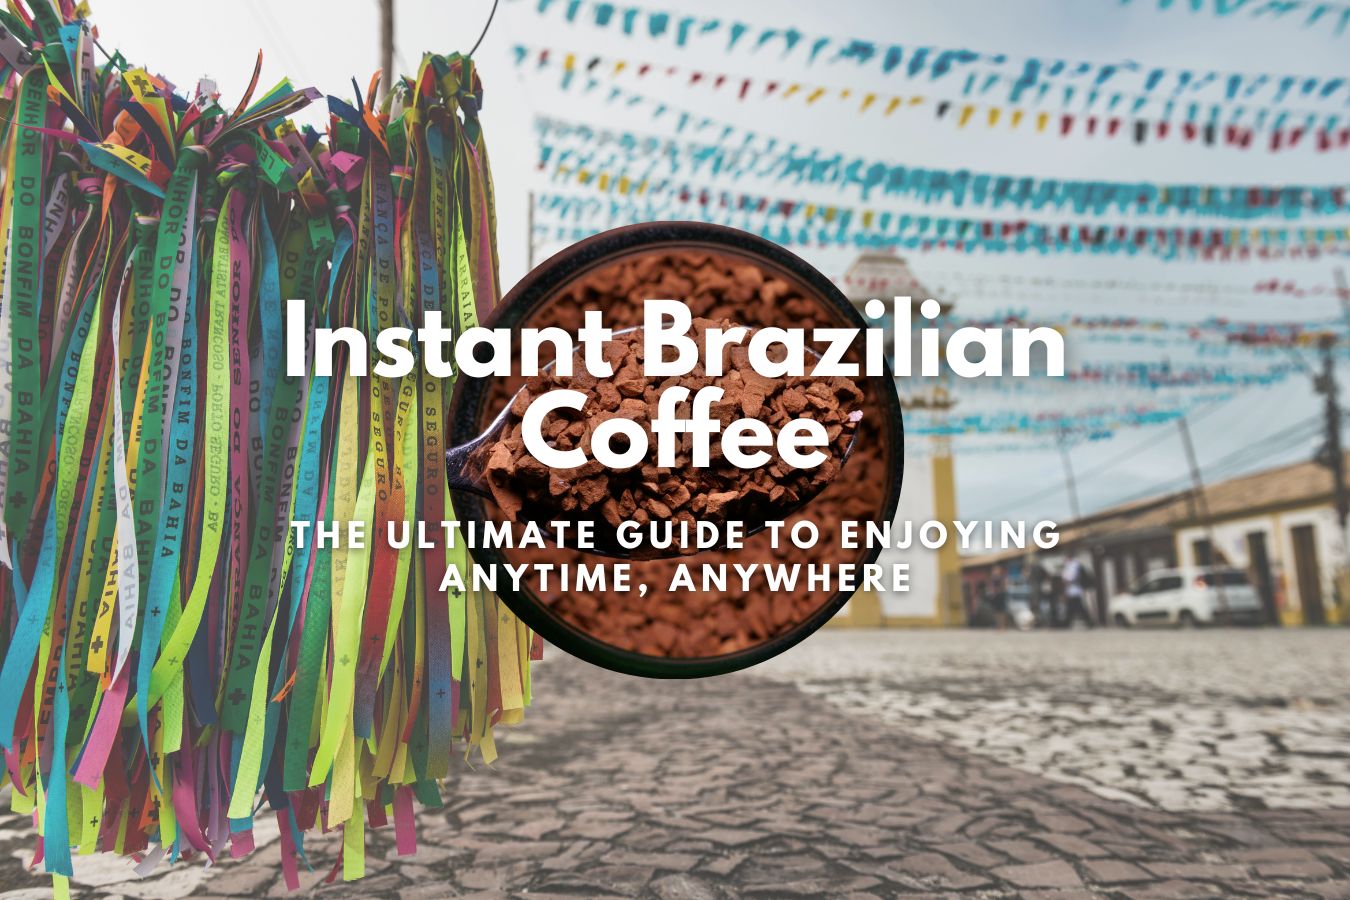 The Ultimate Guide to Enjoying Instant Brazilian Coffee Anytime, Anywhere